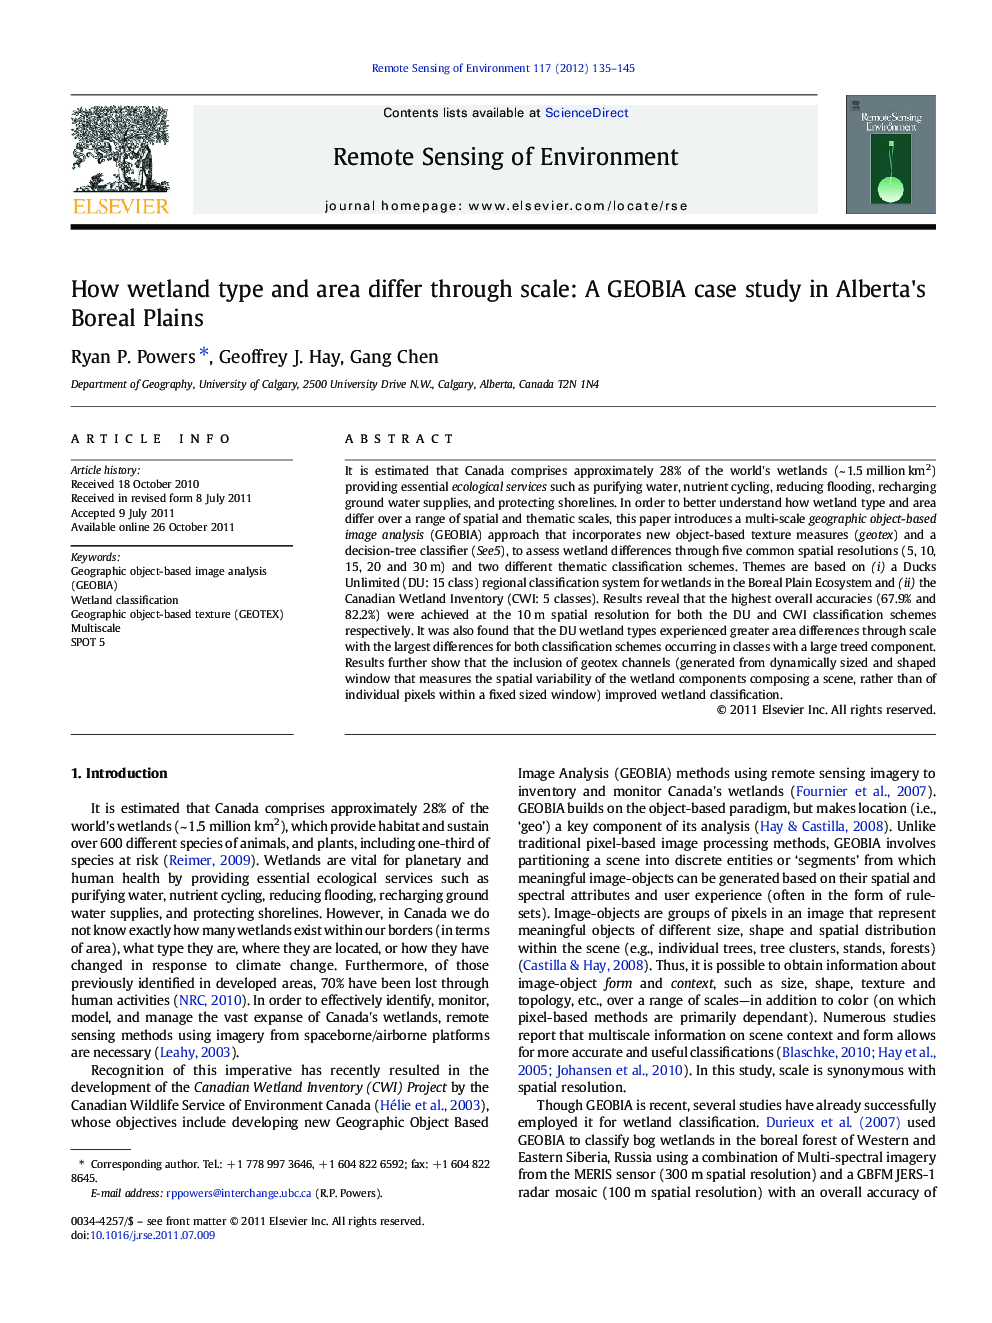 How wetland type and area differ through scale: A GEOBIA case study in Alberta's Boreal Plains